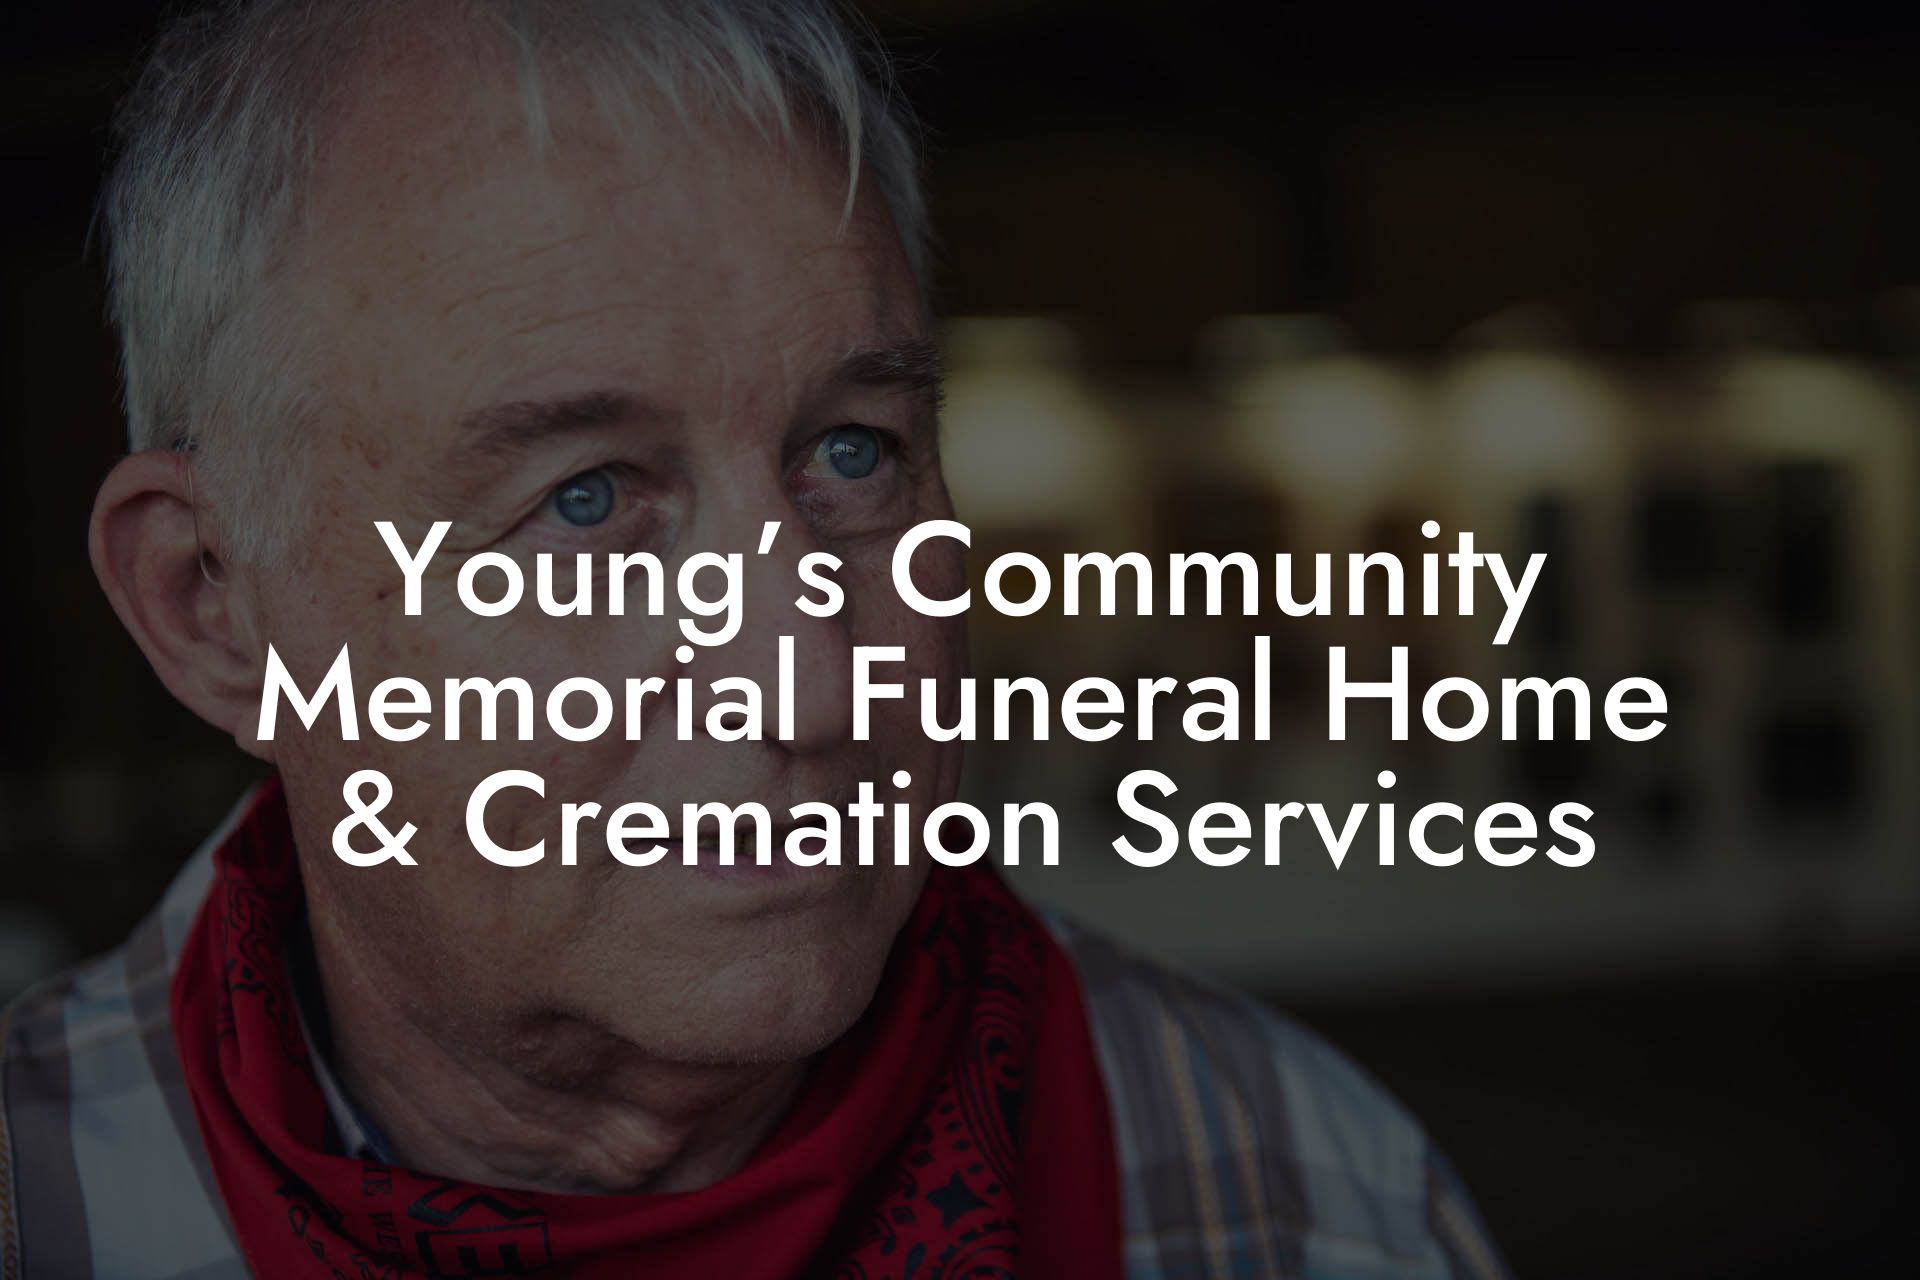 Young’s Community Memorial Funeral Home & Cremation Services